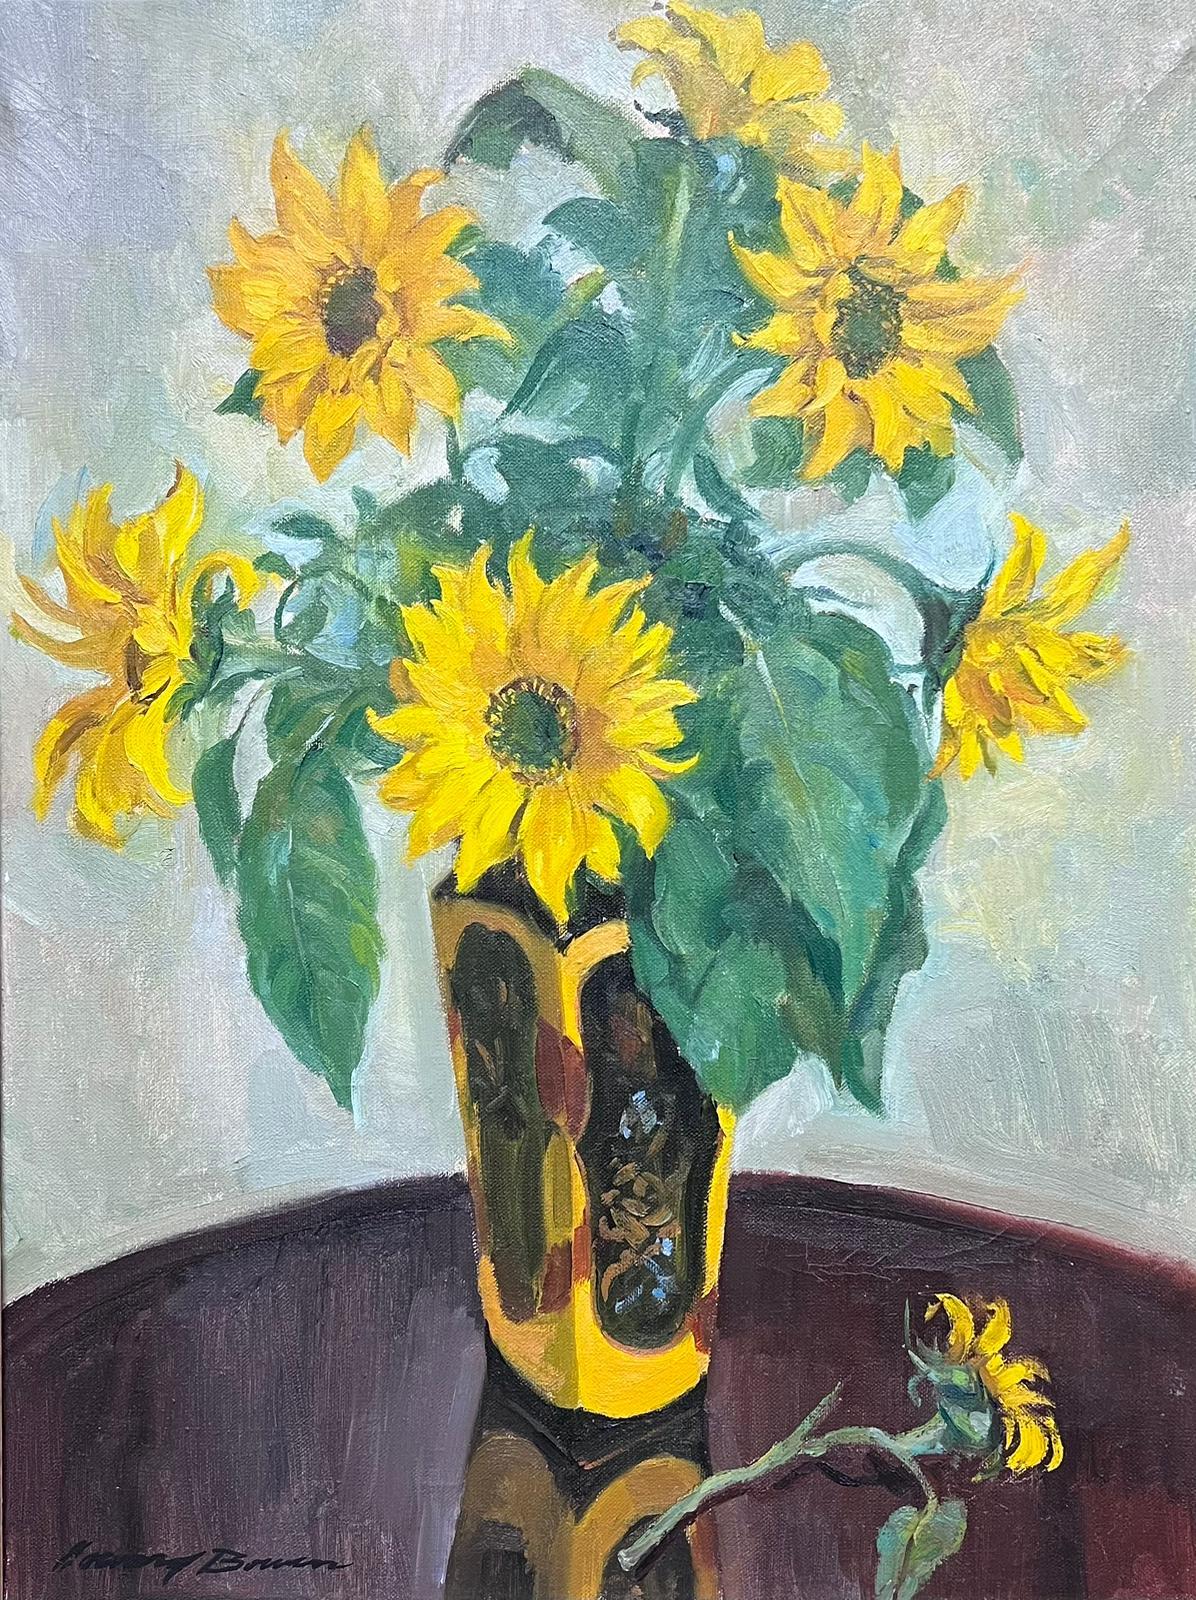 Sunflowers in Vase 1950's English Impressionist Signed Oil Painting on Canvas - Brown Still-Life Painting by Mid 20th Century English Impressionist